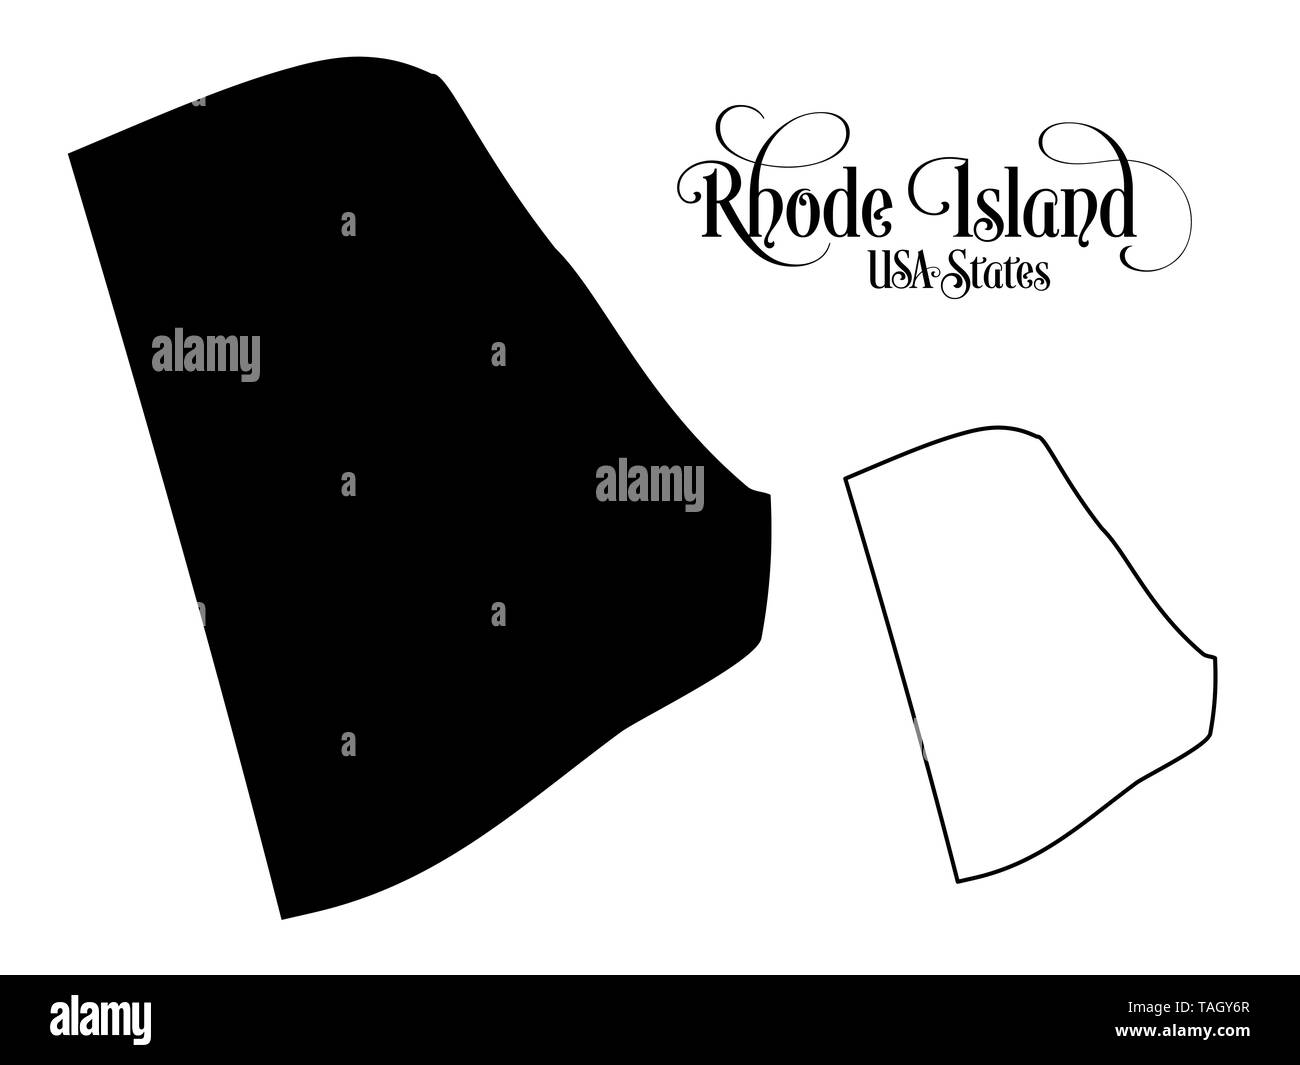 Map of The United States of America (USA) State of Rhode Island - Illustration on White Background. Stock Photo